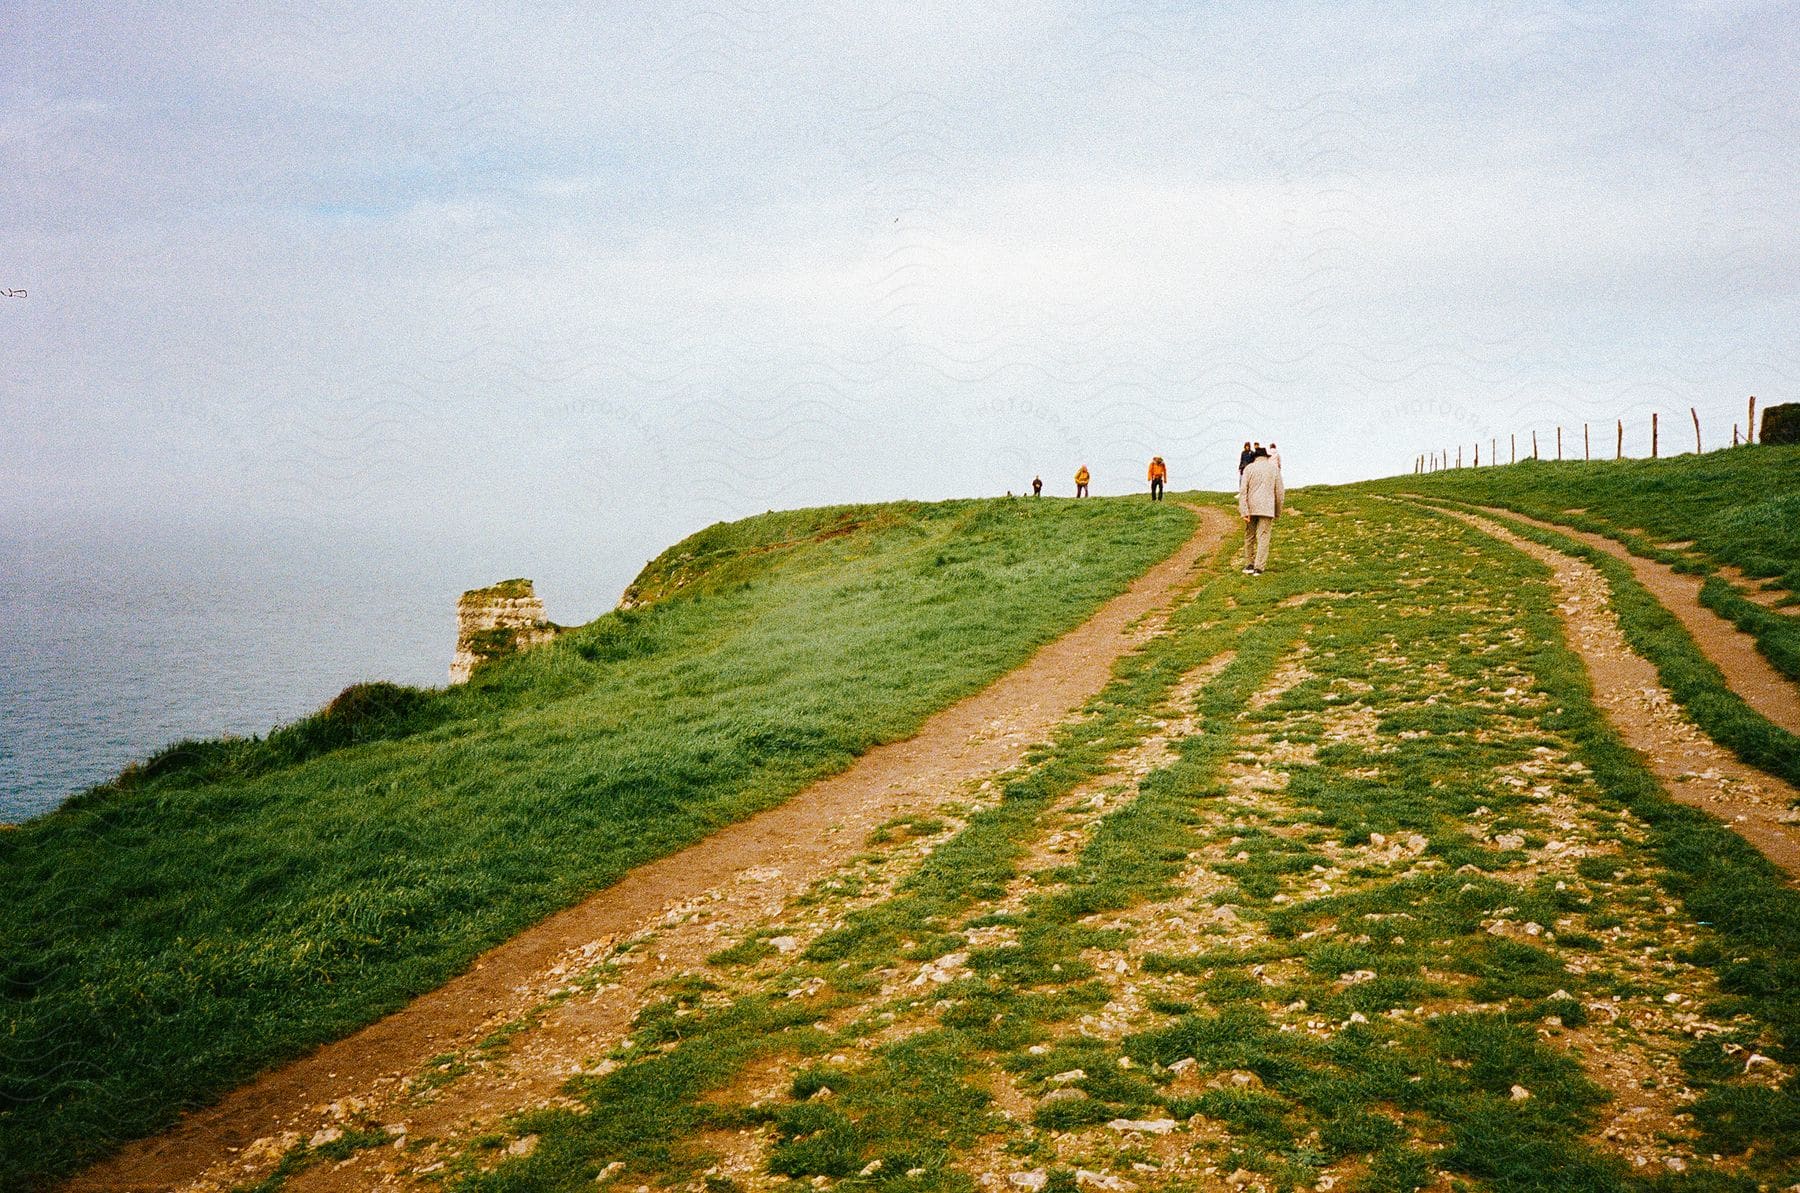 People are walking up a hill overlooking the coast under a cloudy sky